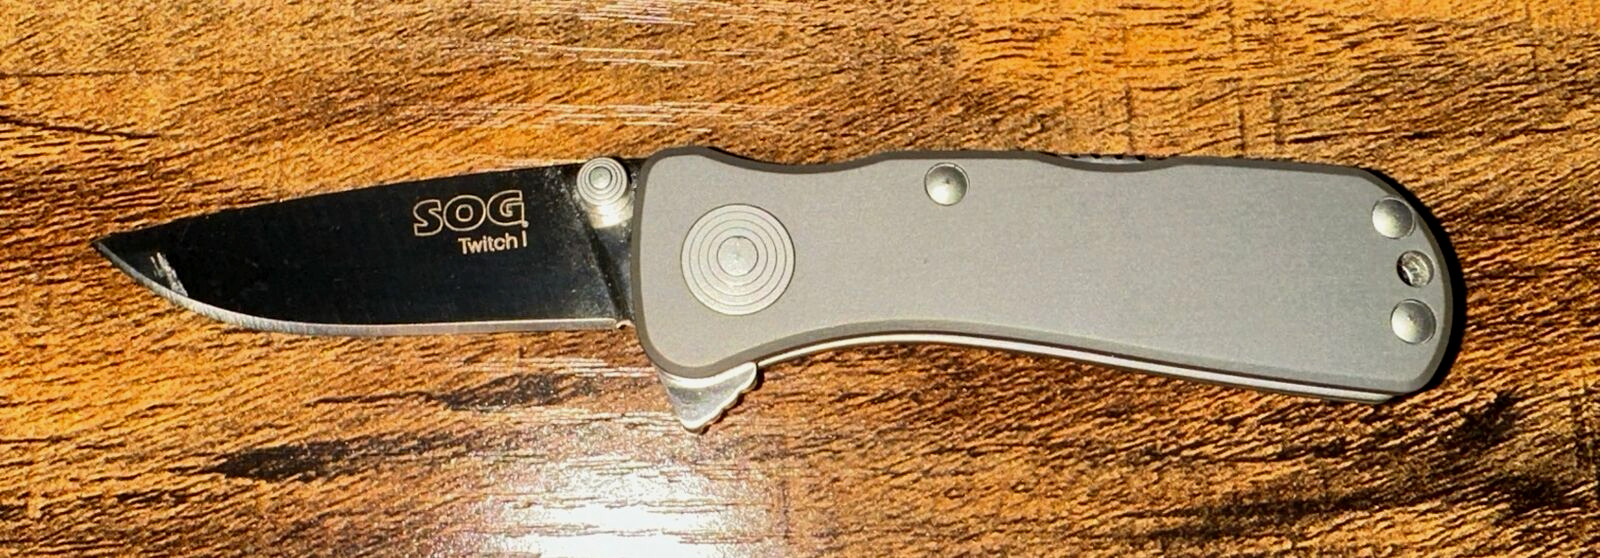 SOG Twitch I 1 Gray RARE Discontinued Assisted Pocket Knife - Great condition